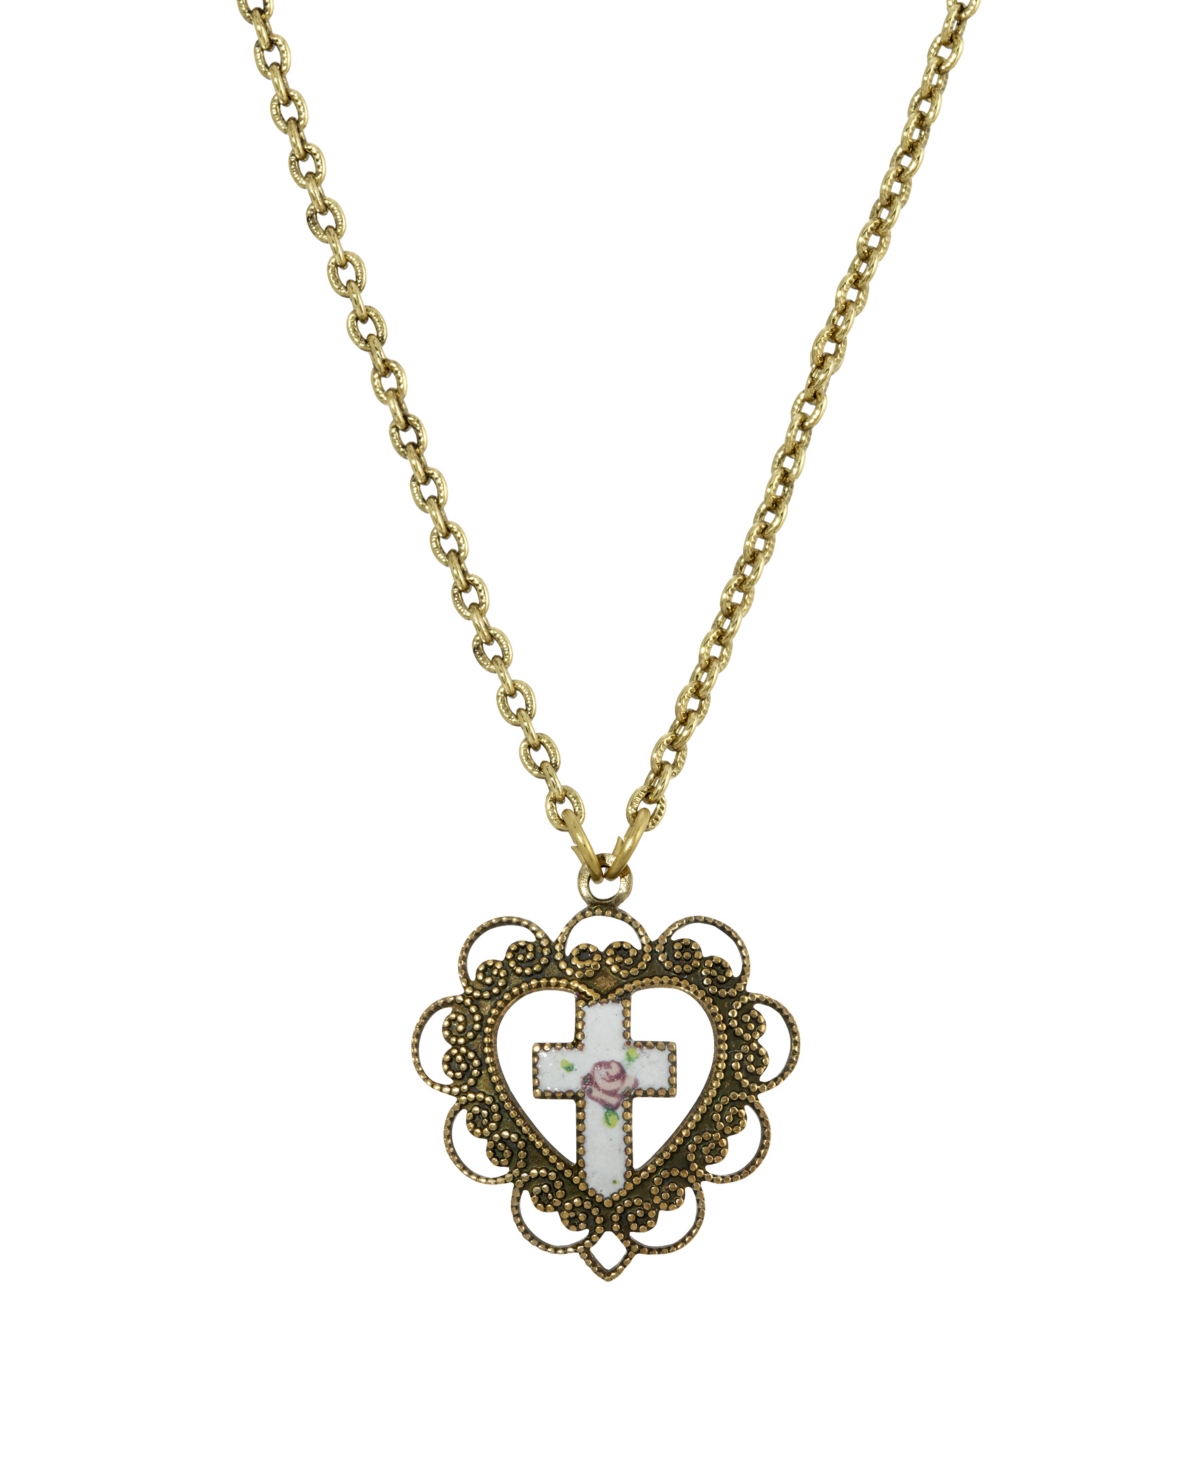 Gold-Tone Heart with White Floral Cross Necklace - White